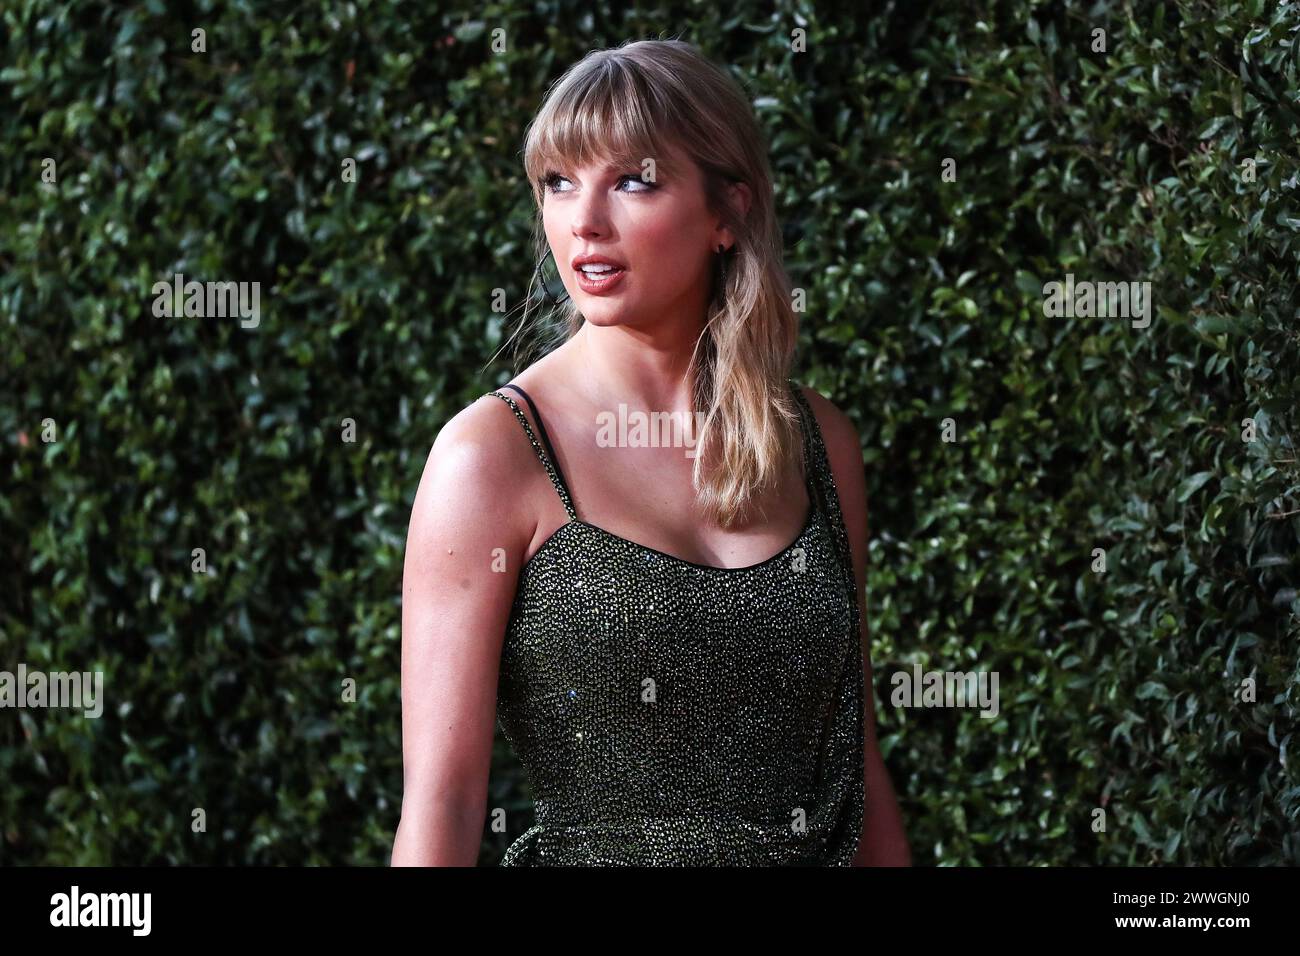 (FILE) ‘Taylor Swift: The Eras Tour' Breaks Disney+ Record as No. 1 Most-Streamed Music Film. LOS ANGELES, CALIFORNIA, USA - NOVEMBER 24: Singer Taylor Swift wearing a Julien Macdonald dress, Casadei boots, and Ofira jewelry arrives at the 2019 American Music Awards held at Microsoft Theatre L.A. Live on November 24, 2019 in Los Angeles, California, United States. (Photo by Xavier Collin/Image Press Agency) Stock Photo